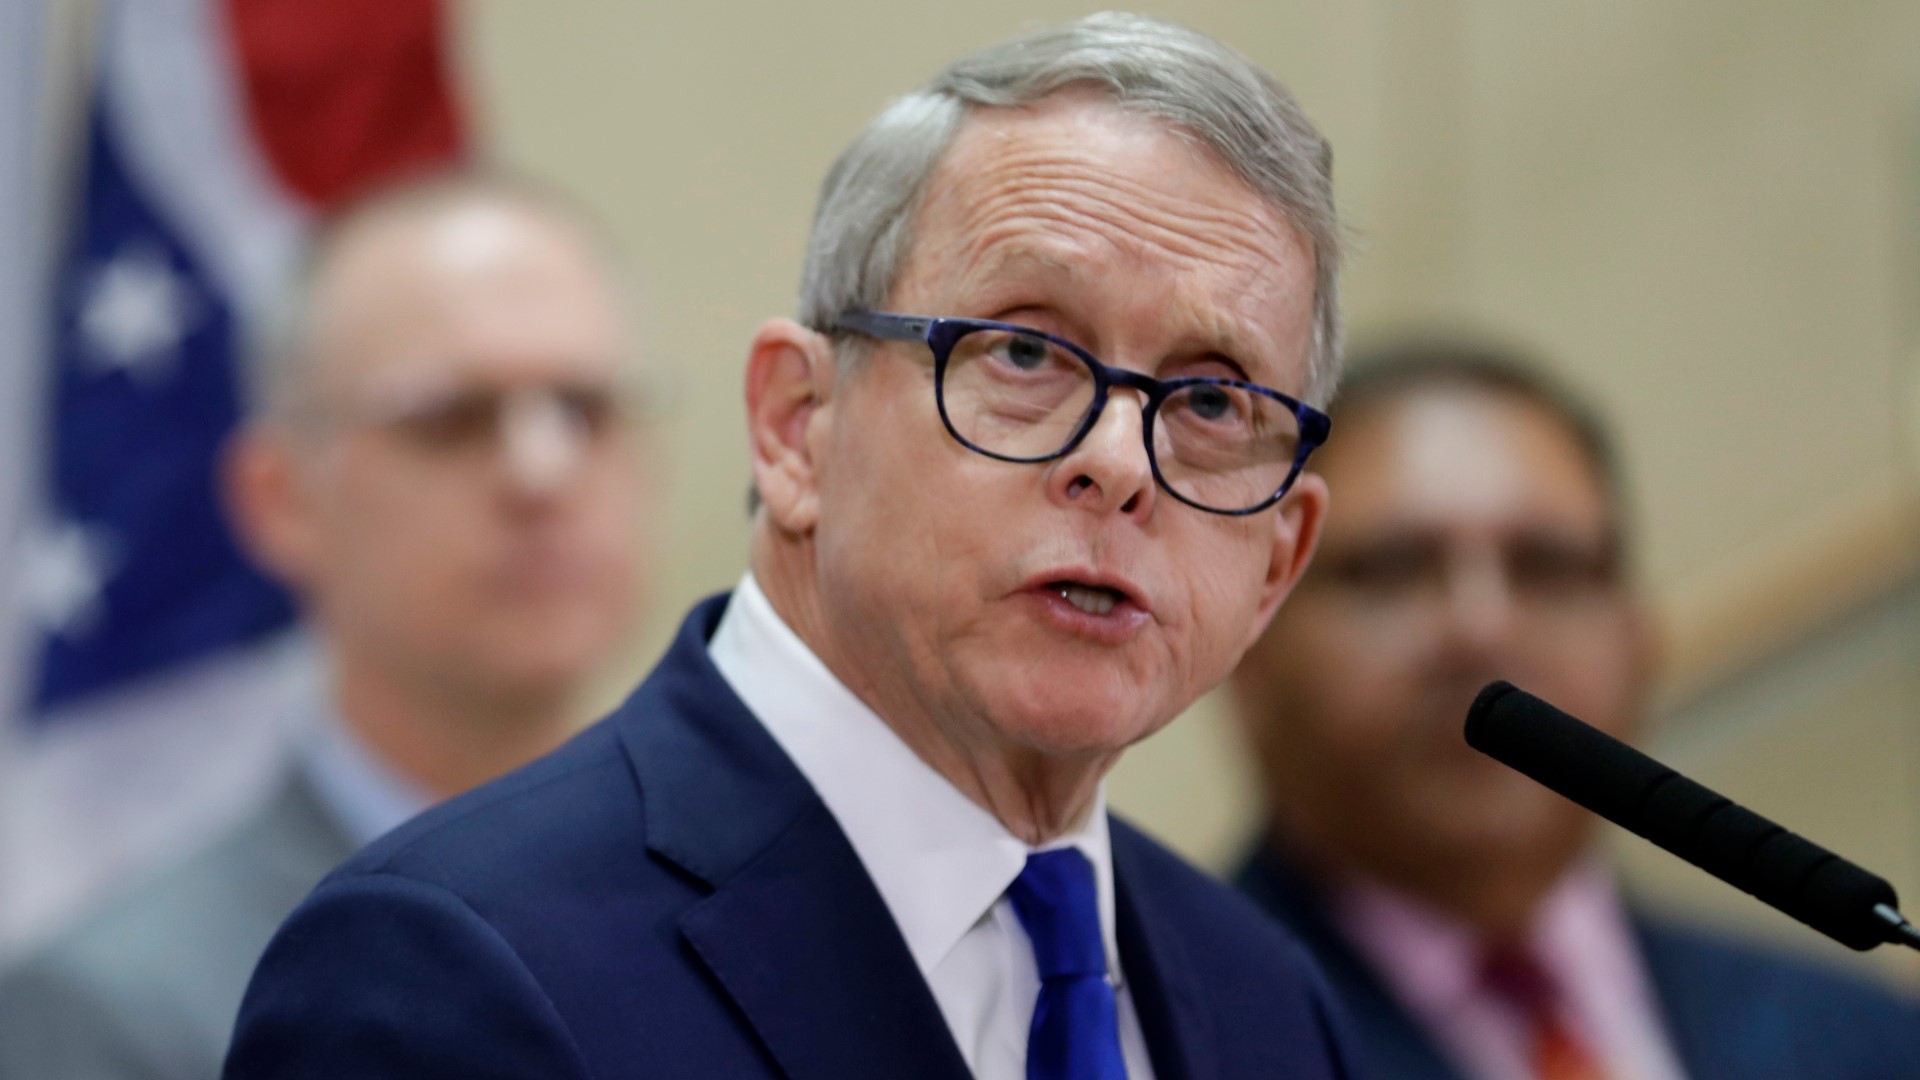 Gov. DeWine said Columbus City Schools would be “breaking the agreement” if students and teachers don’t return to the classroom by March 1.